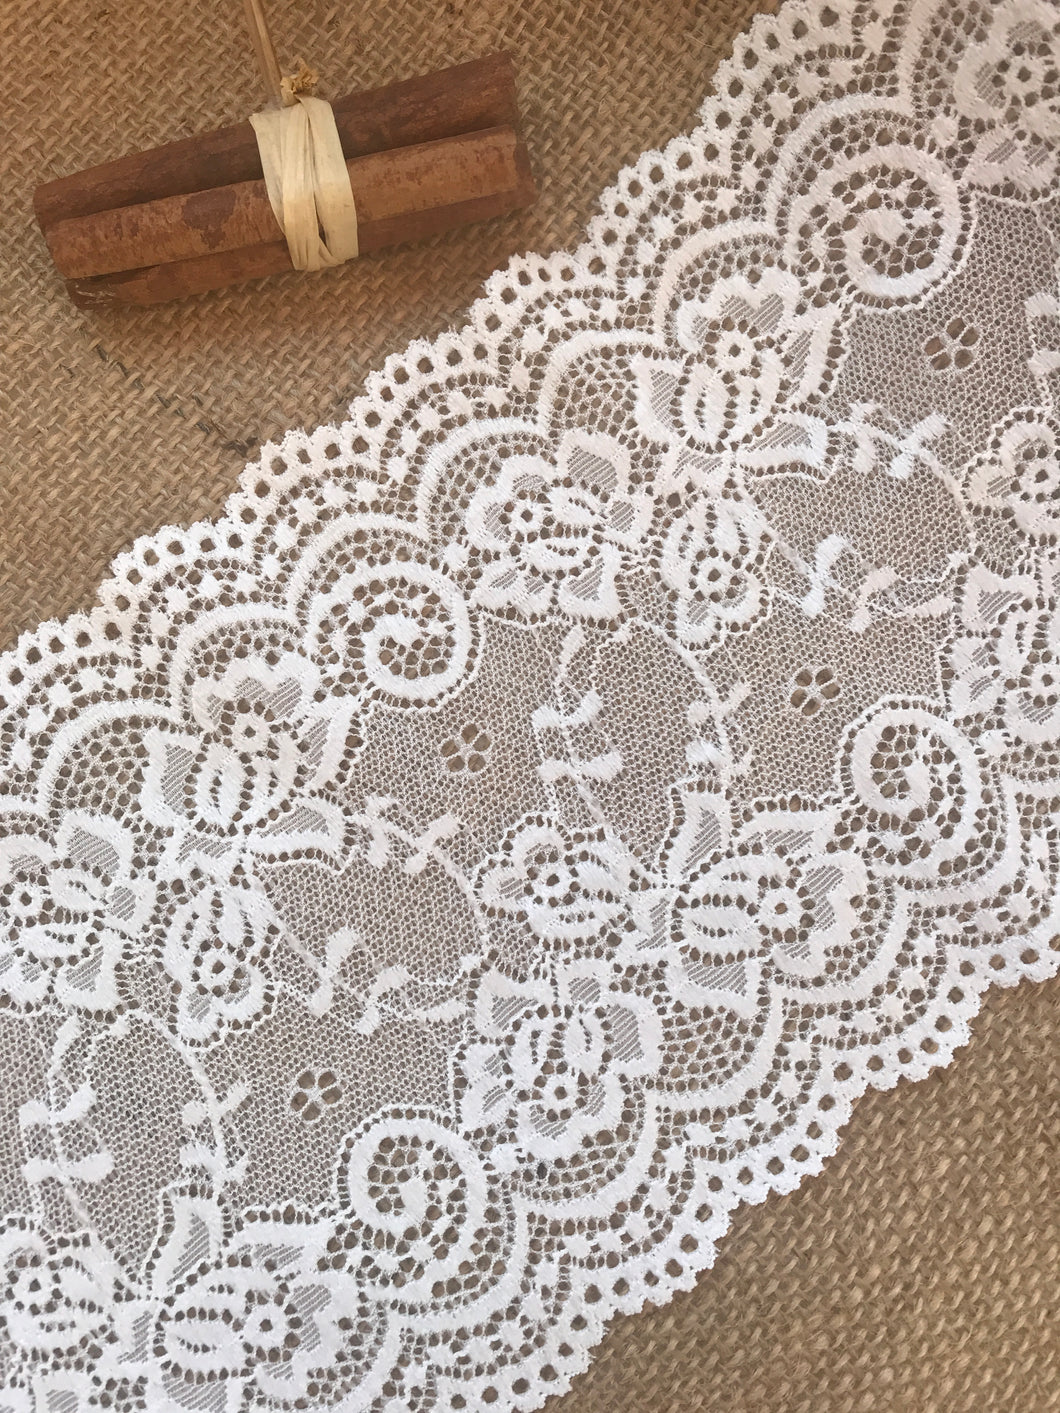 Ivory Stretch Lace Wide 15.5 cm/6 French. Lingerie Craft Bridal Sew – The  Lace Co.